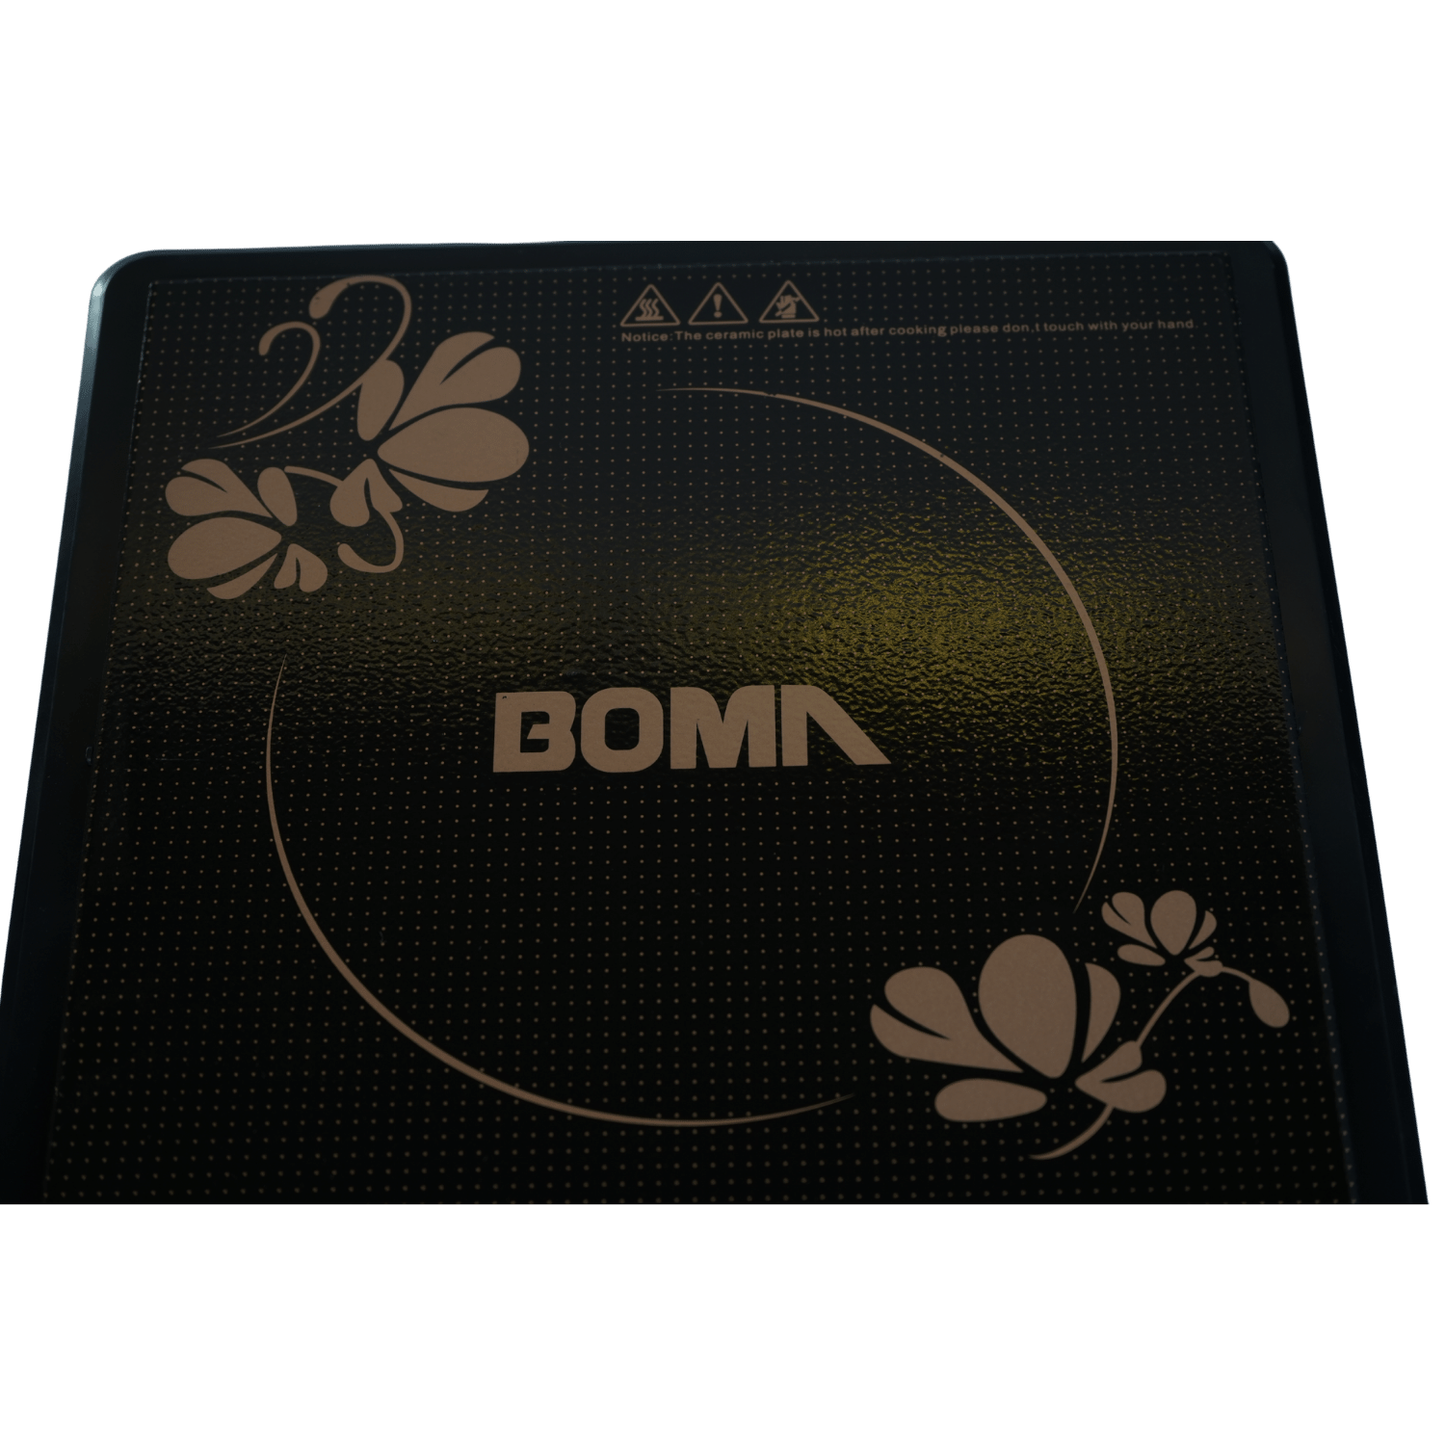 BOMA 2200W Single Burner Multi function Electric Induction Cooker